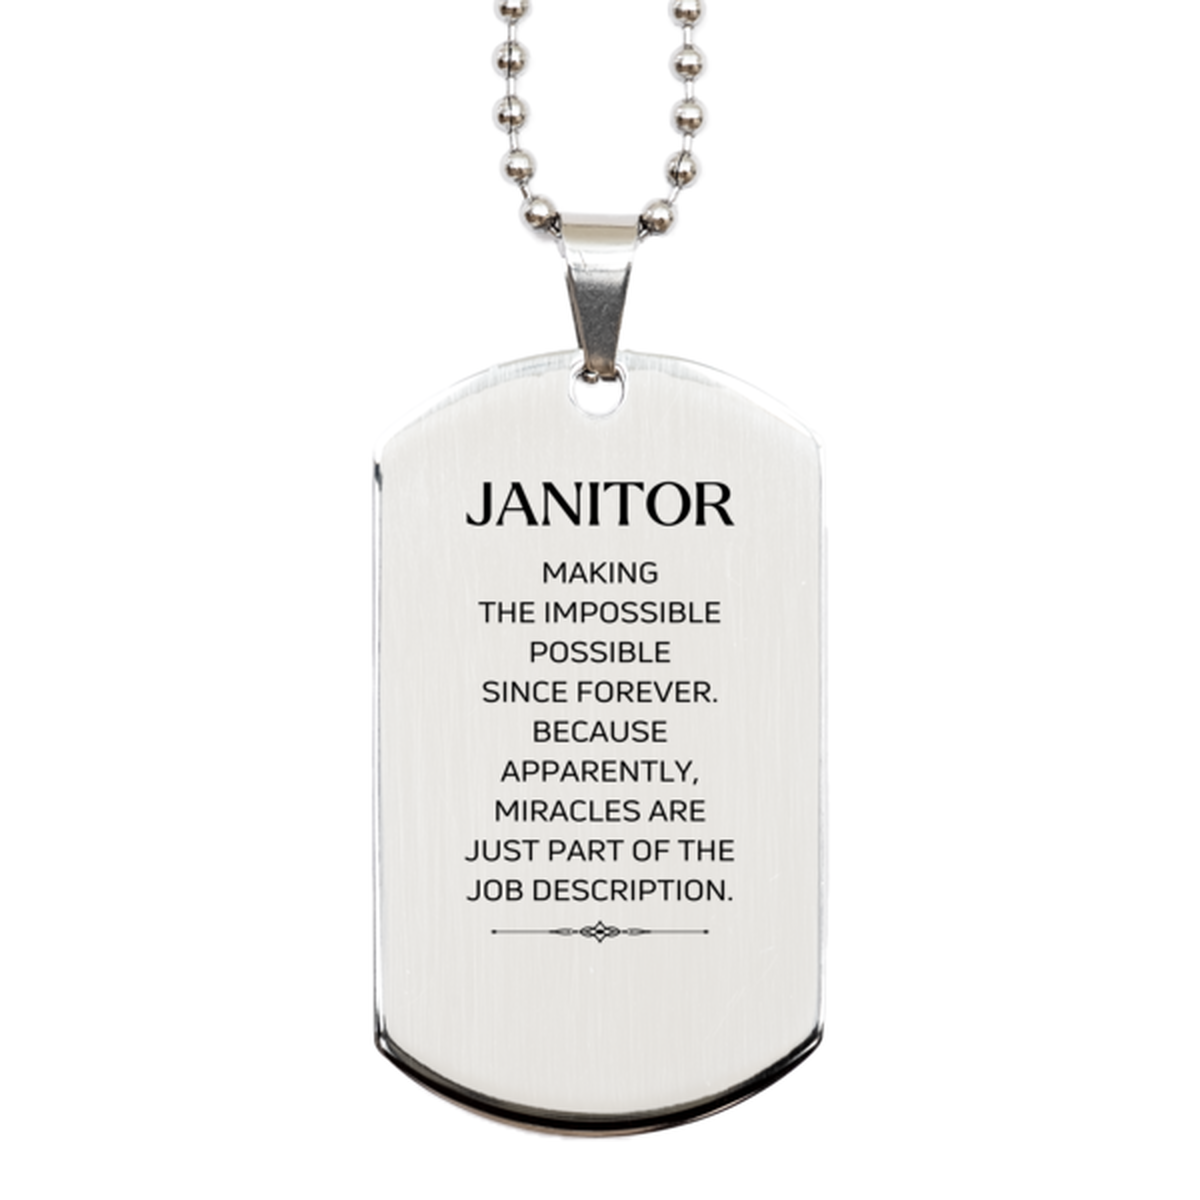 Funny Janitor Gifts, Miracles are just part of the job description, Inspirational Birthday Silver Dog Tag For Janitor, Men, Women, Coworkers, Friends, Boss